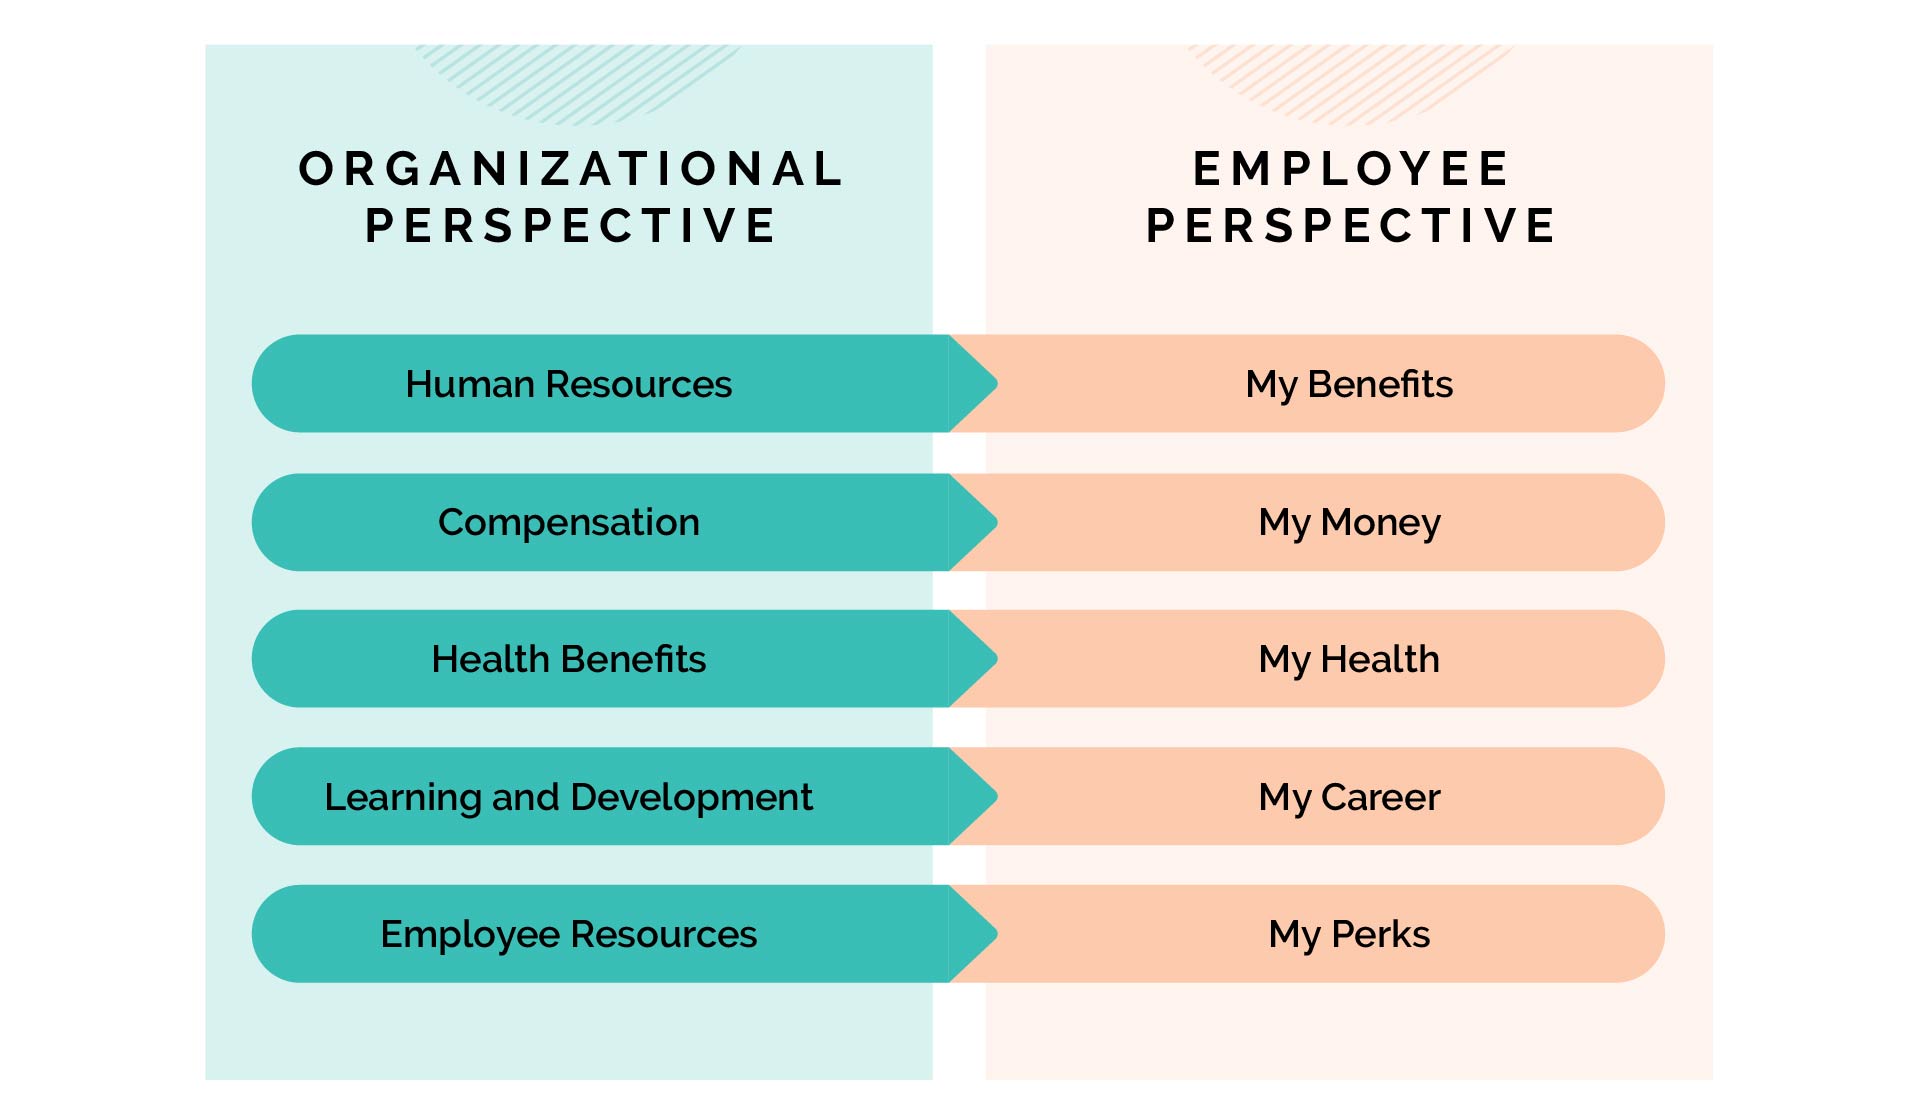 Organizational Perspective: Human Resources, Compensation, Health Benefits, Learning and Development, Performance Development. Employee Perspective: My Benefits, My Money, My Health, My Career, Professional Growth